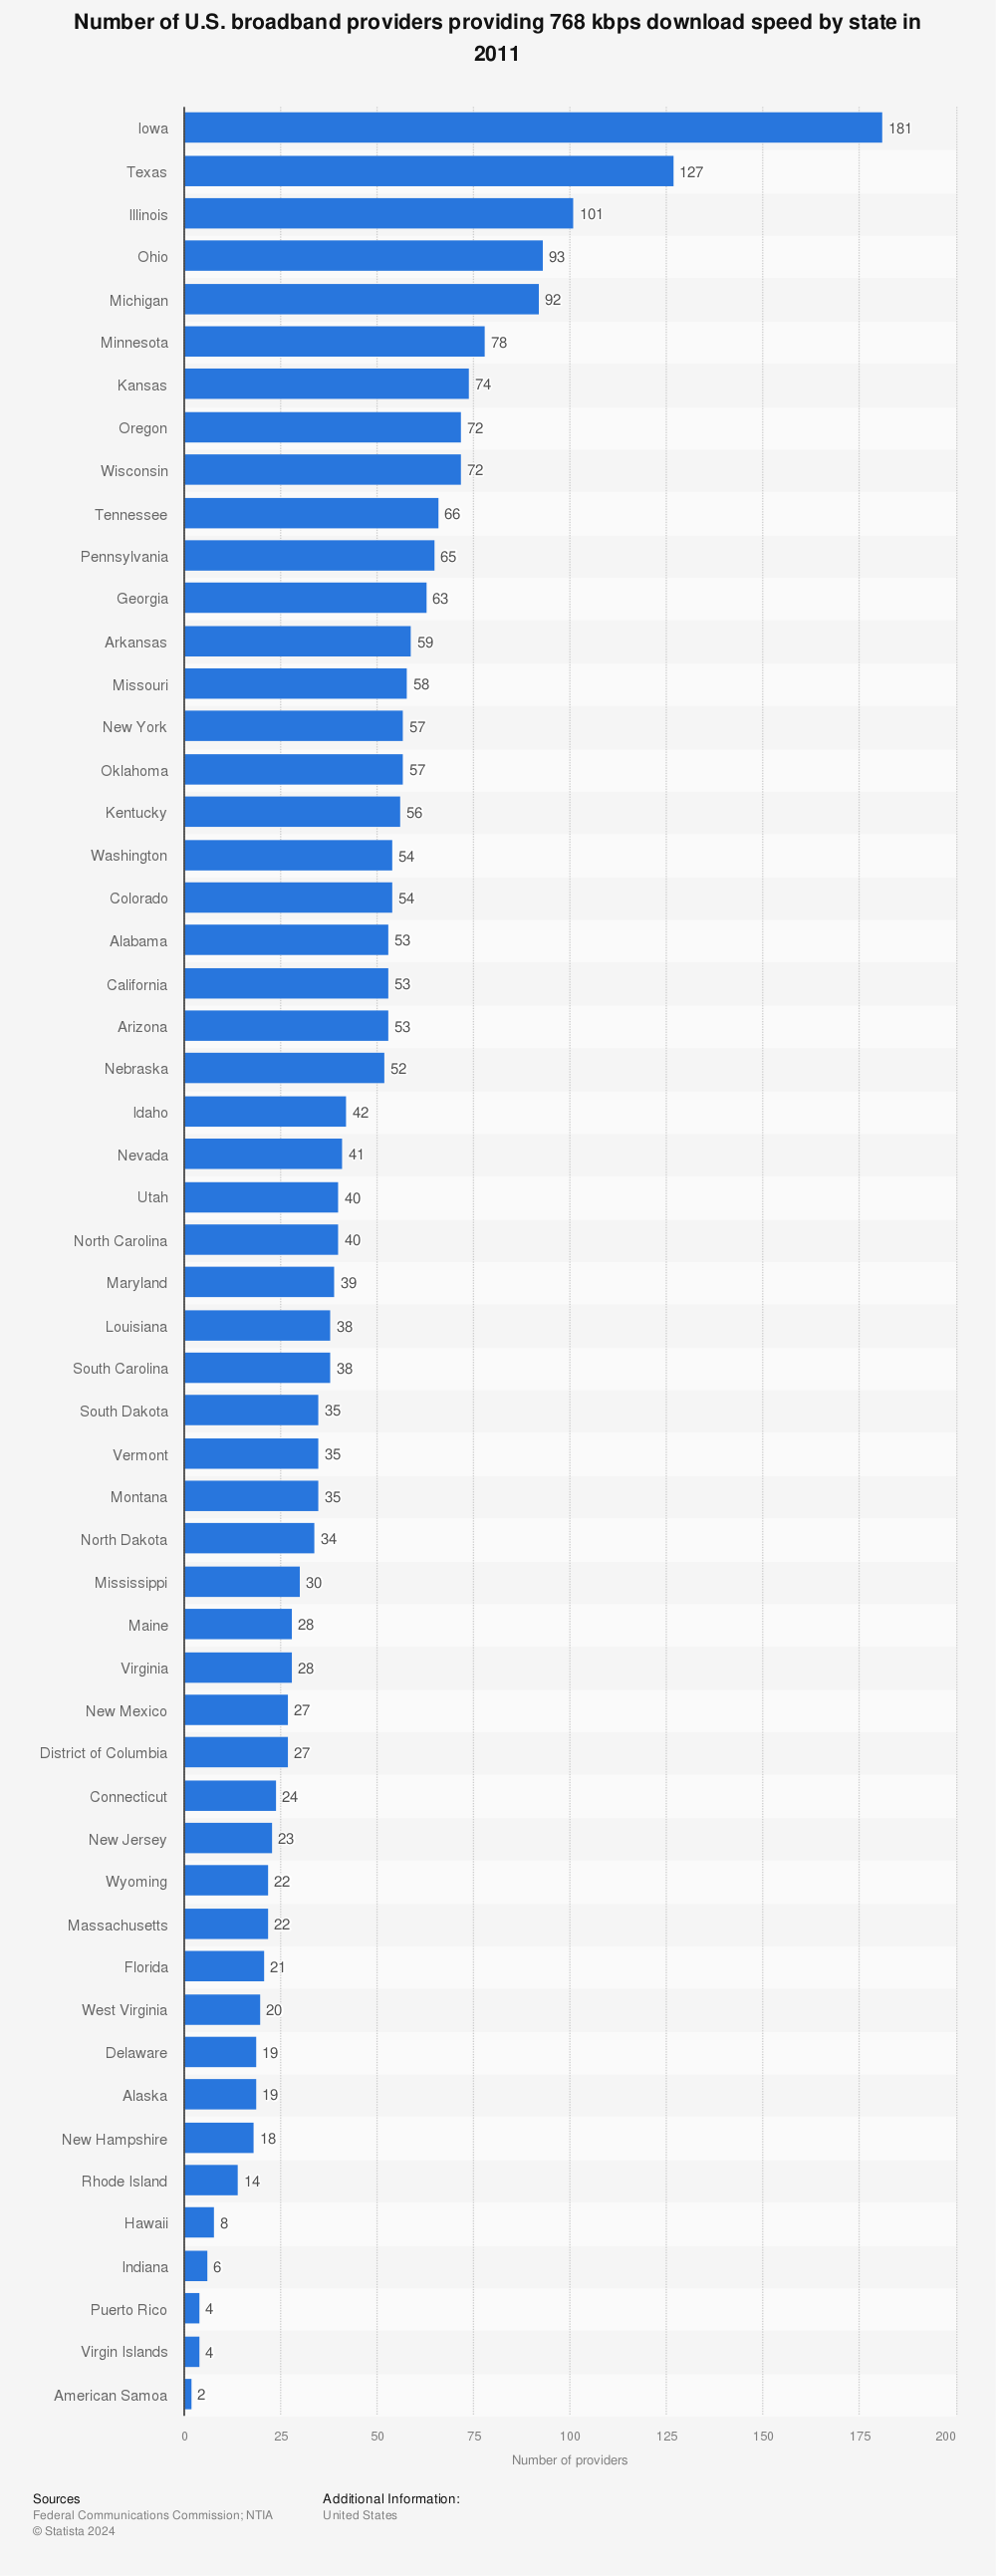 Statistic: Number of U.S. broadband providers providing 768 kbps download speed by state in 2011 | Statista